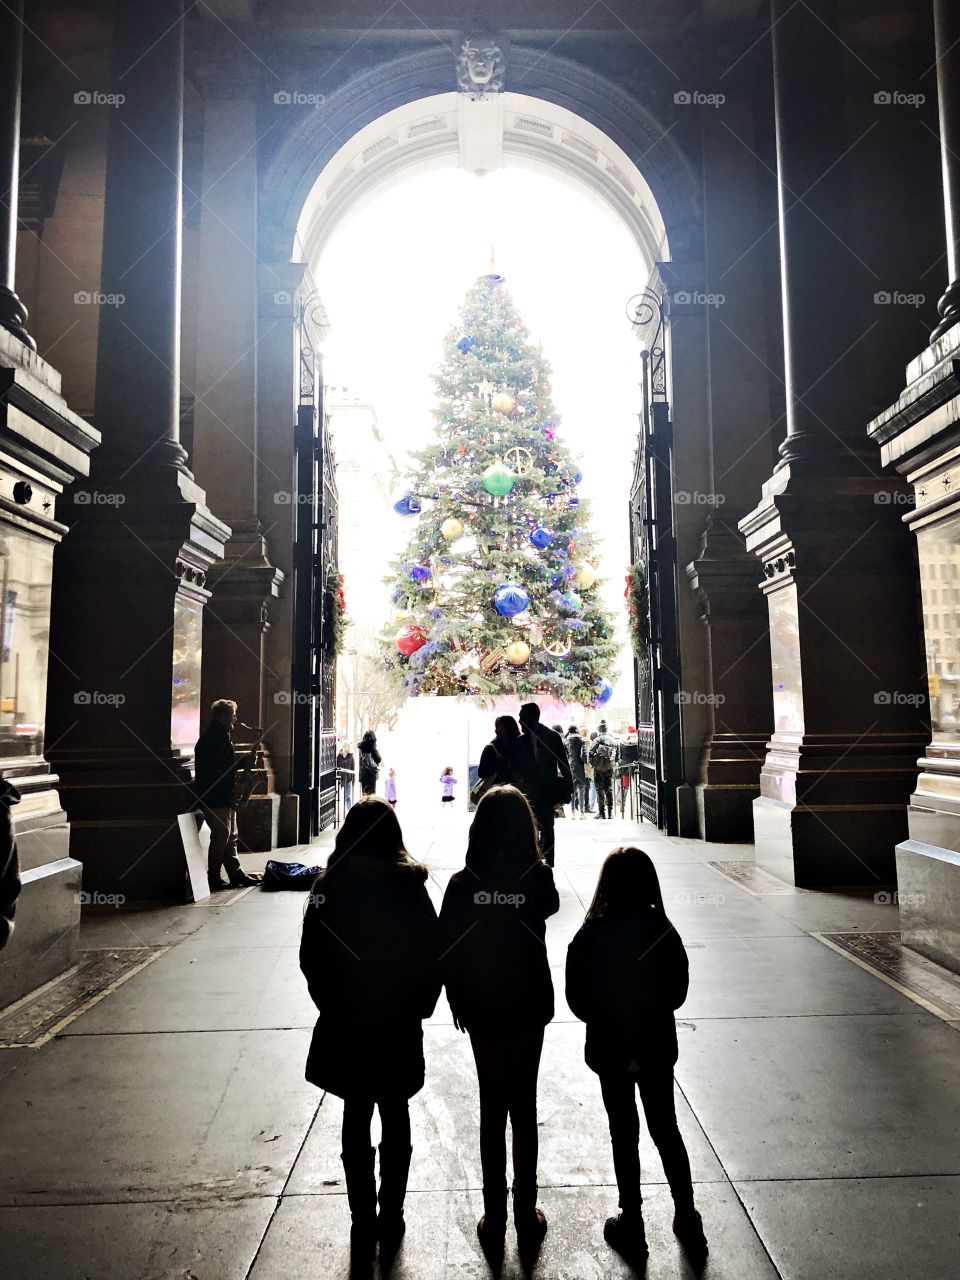 Children in silhouette looking up at Christmas tree in a city. 